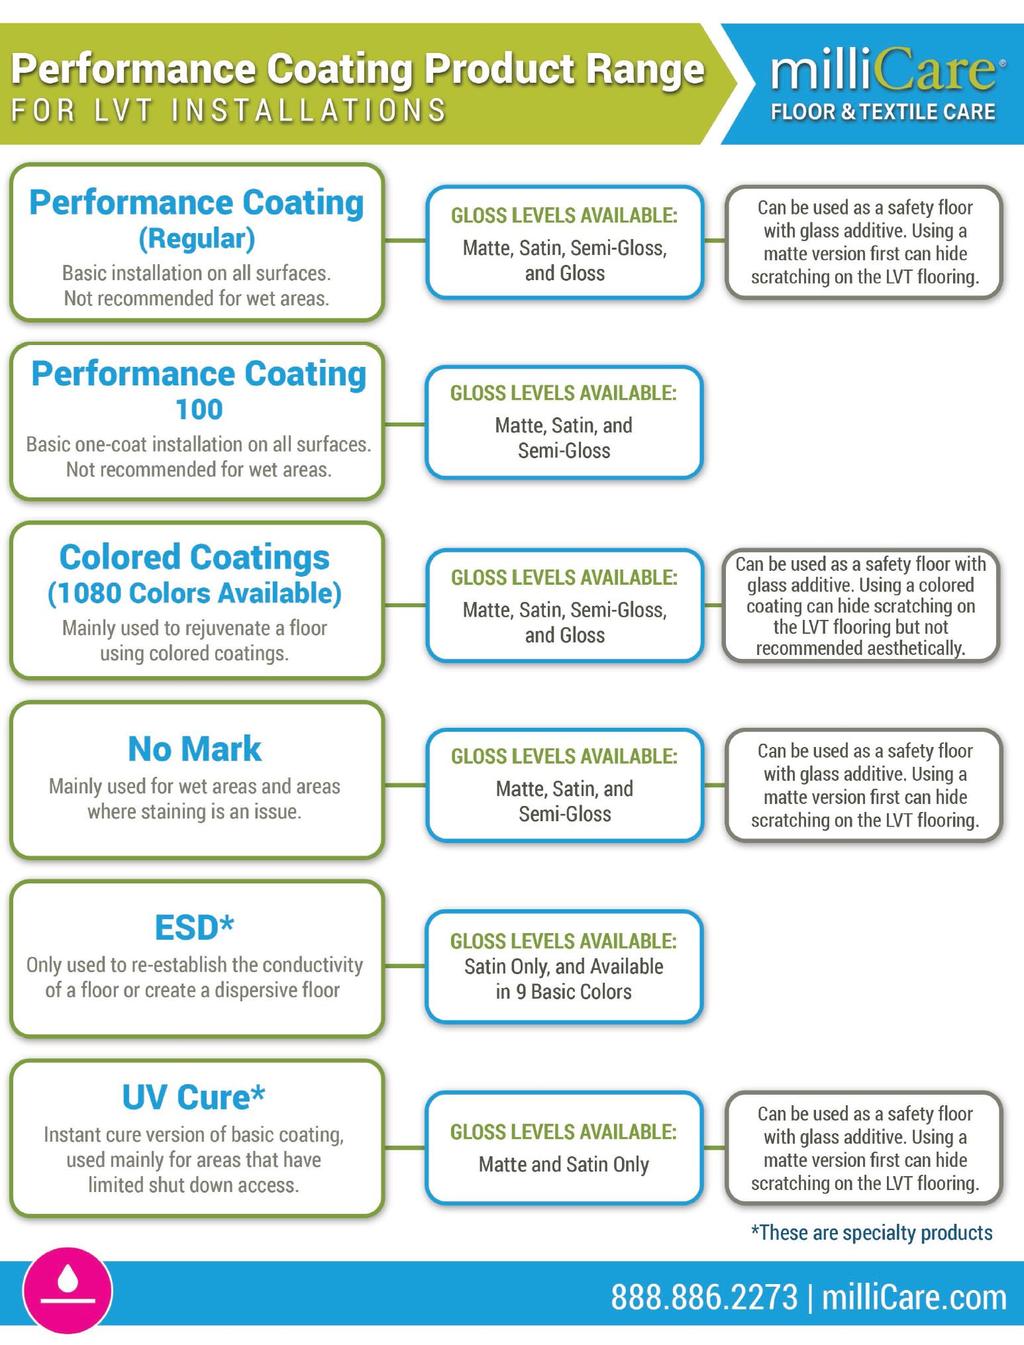 Millicare Performance Coatings require post installation application by trained